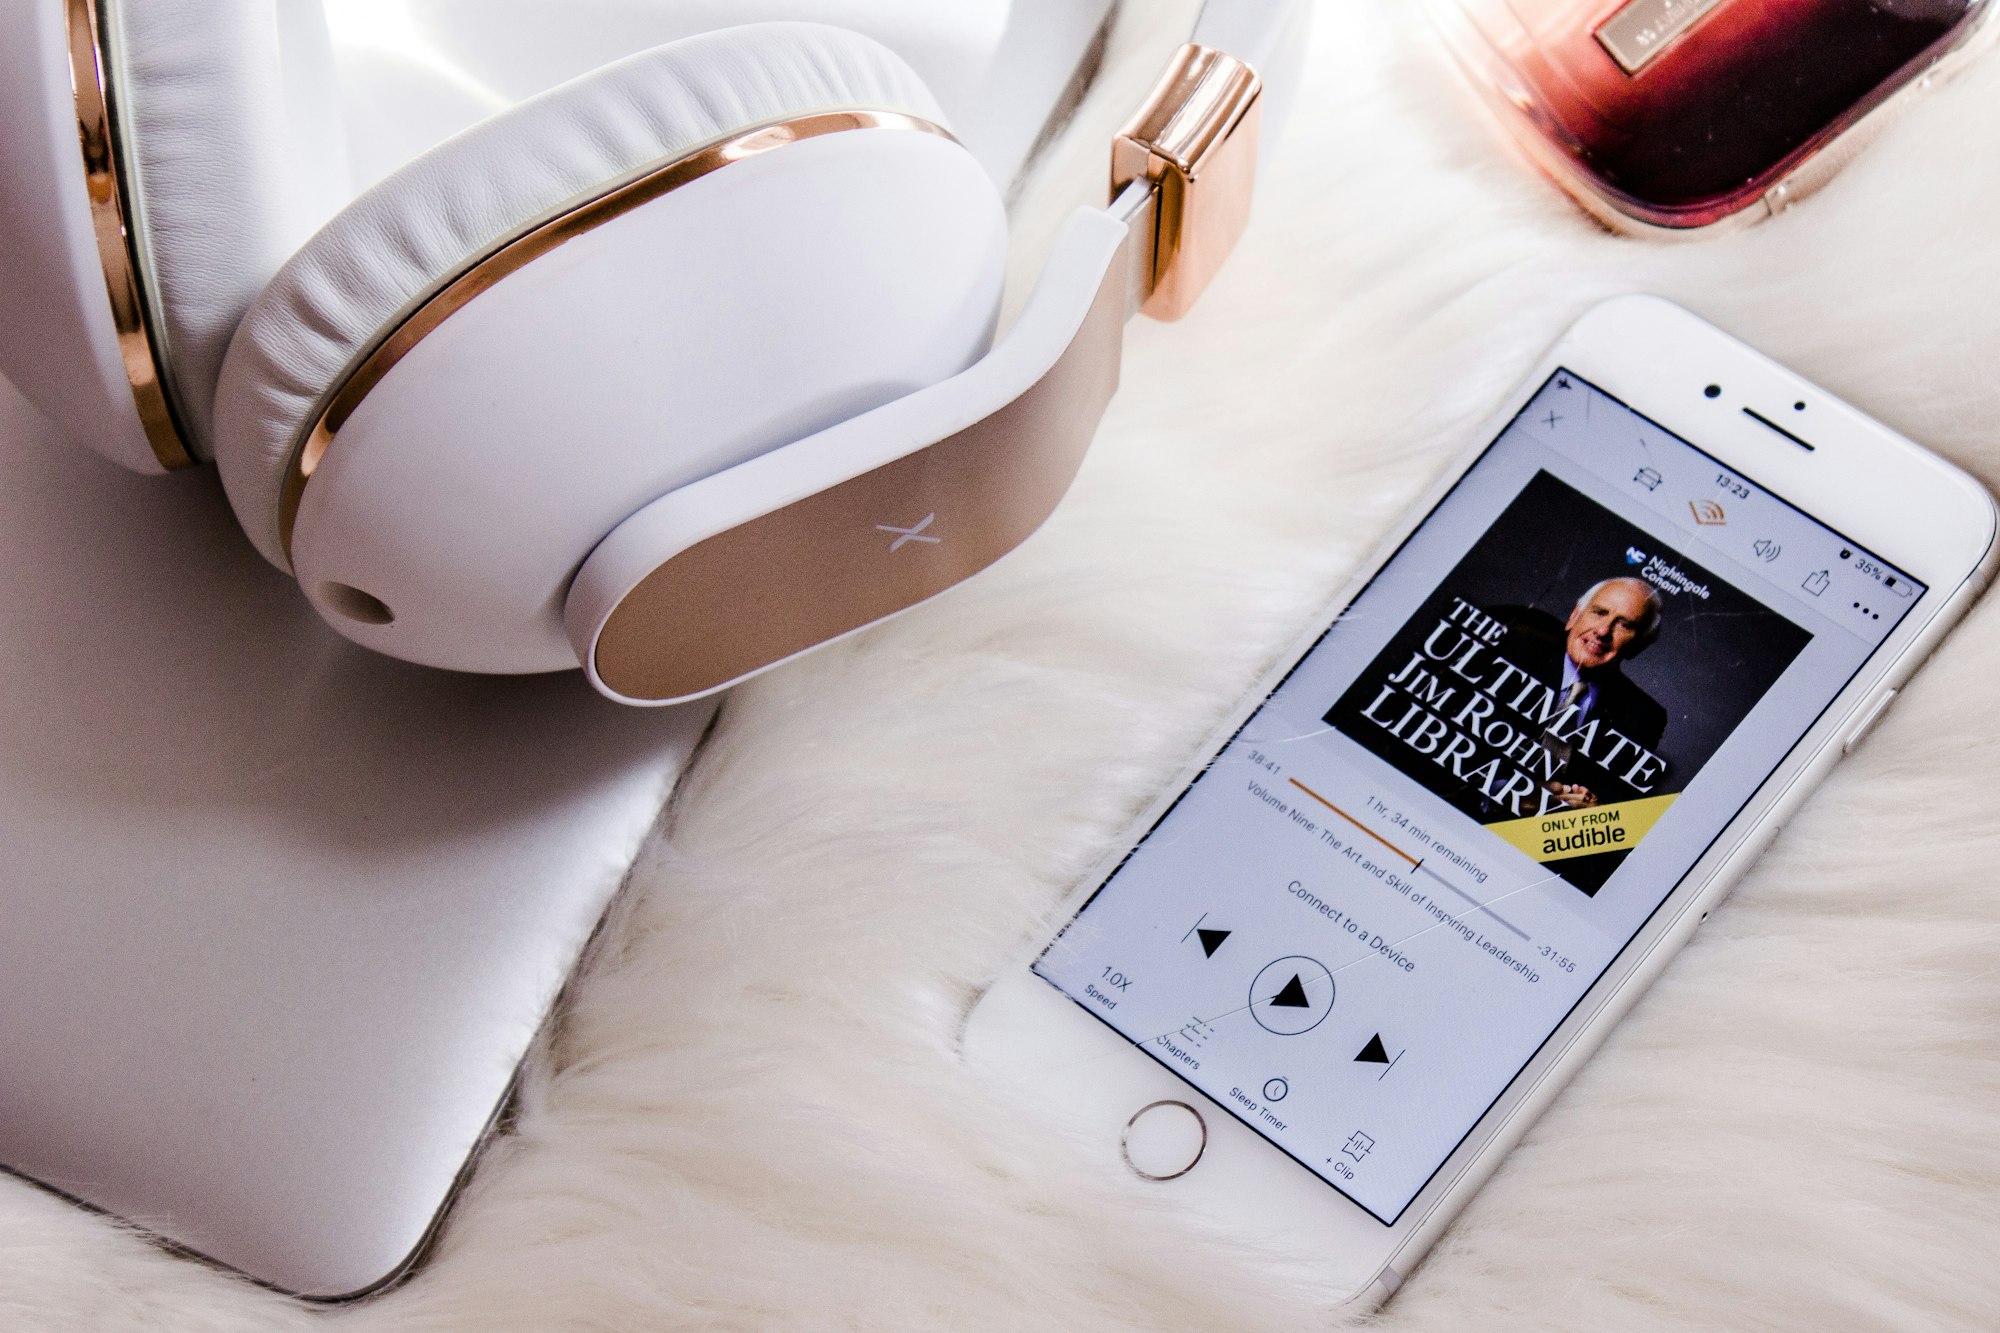 Accessibility improvements or the end of Audiobooks?